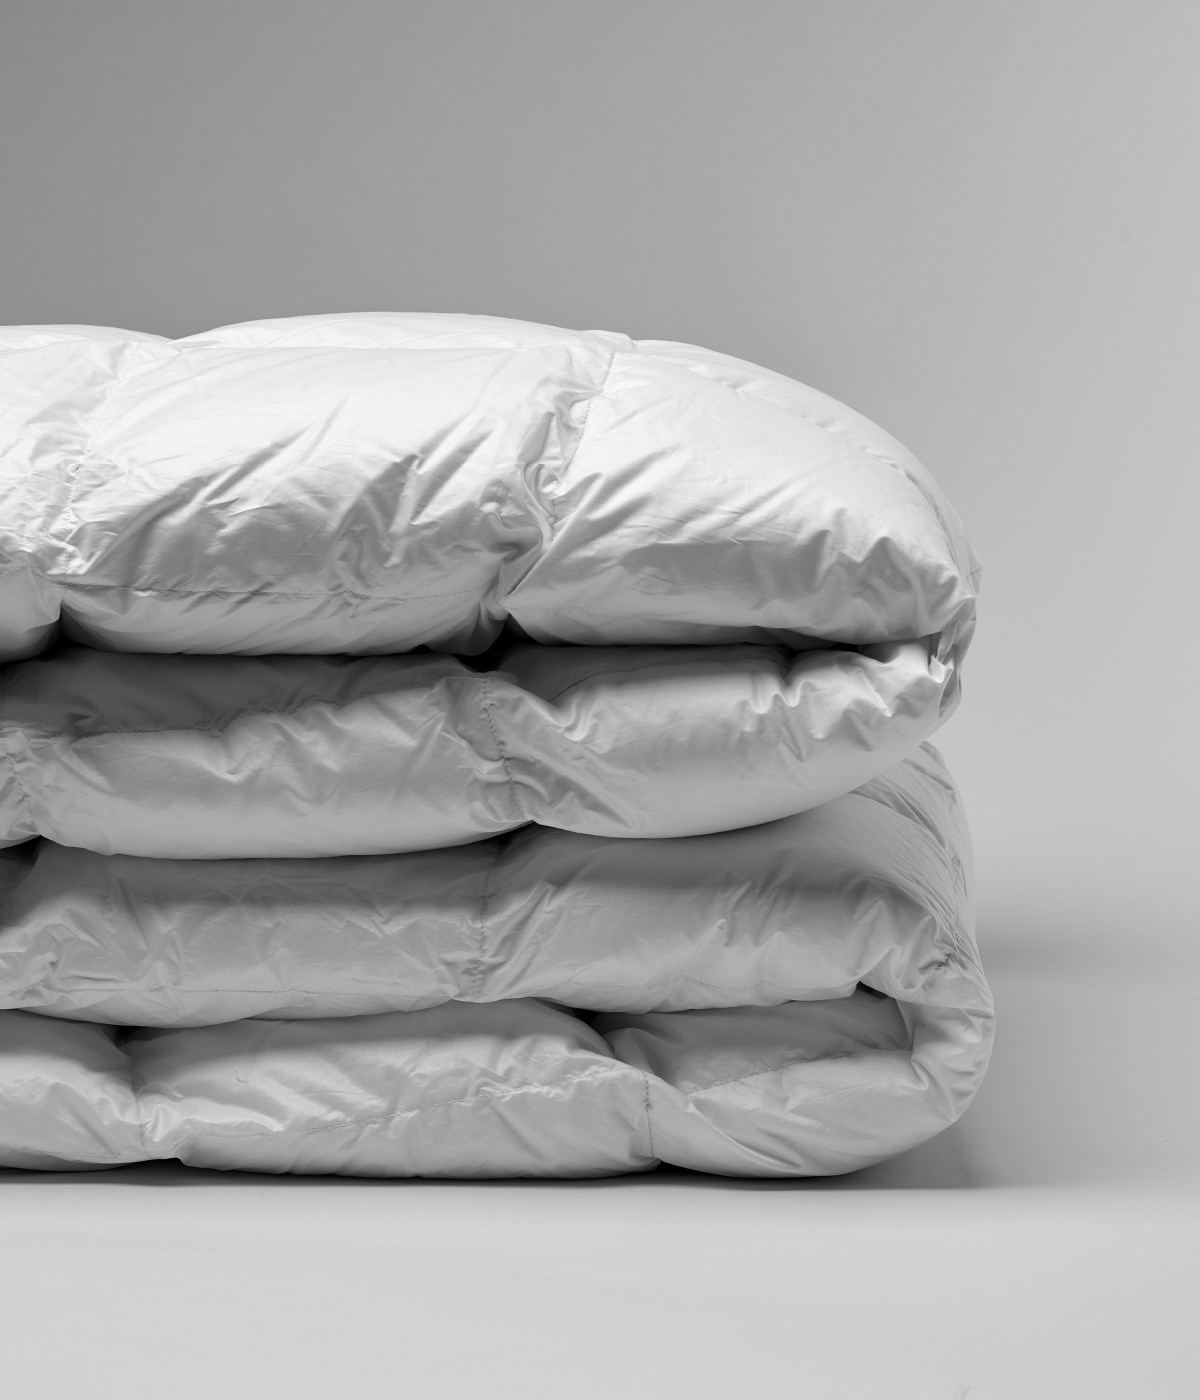 Down Comforters folded and stacked